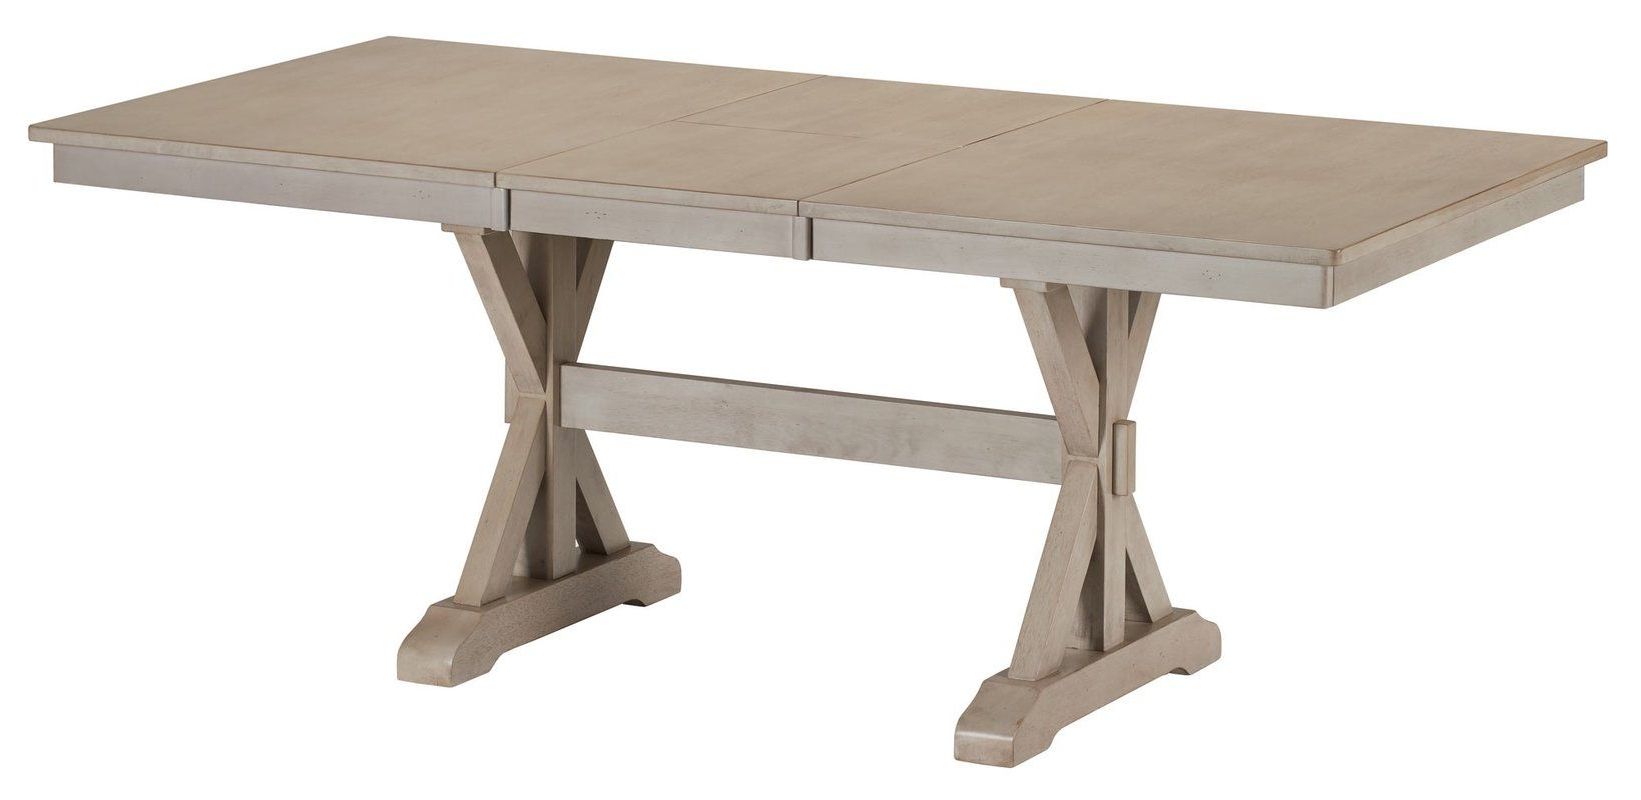 2020 Rutledge Extendable Solid Wood Dining Table (View 14 of 20)